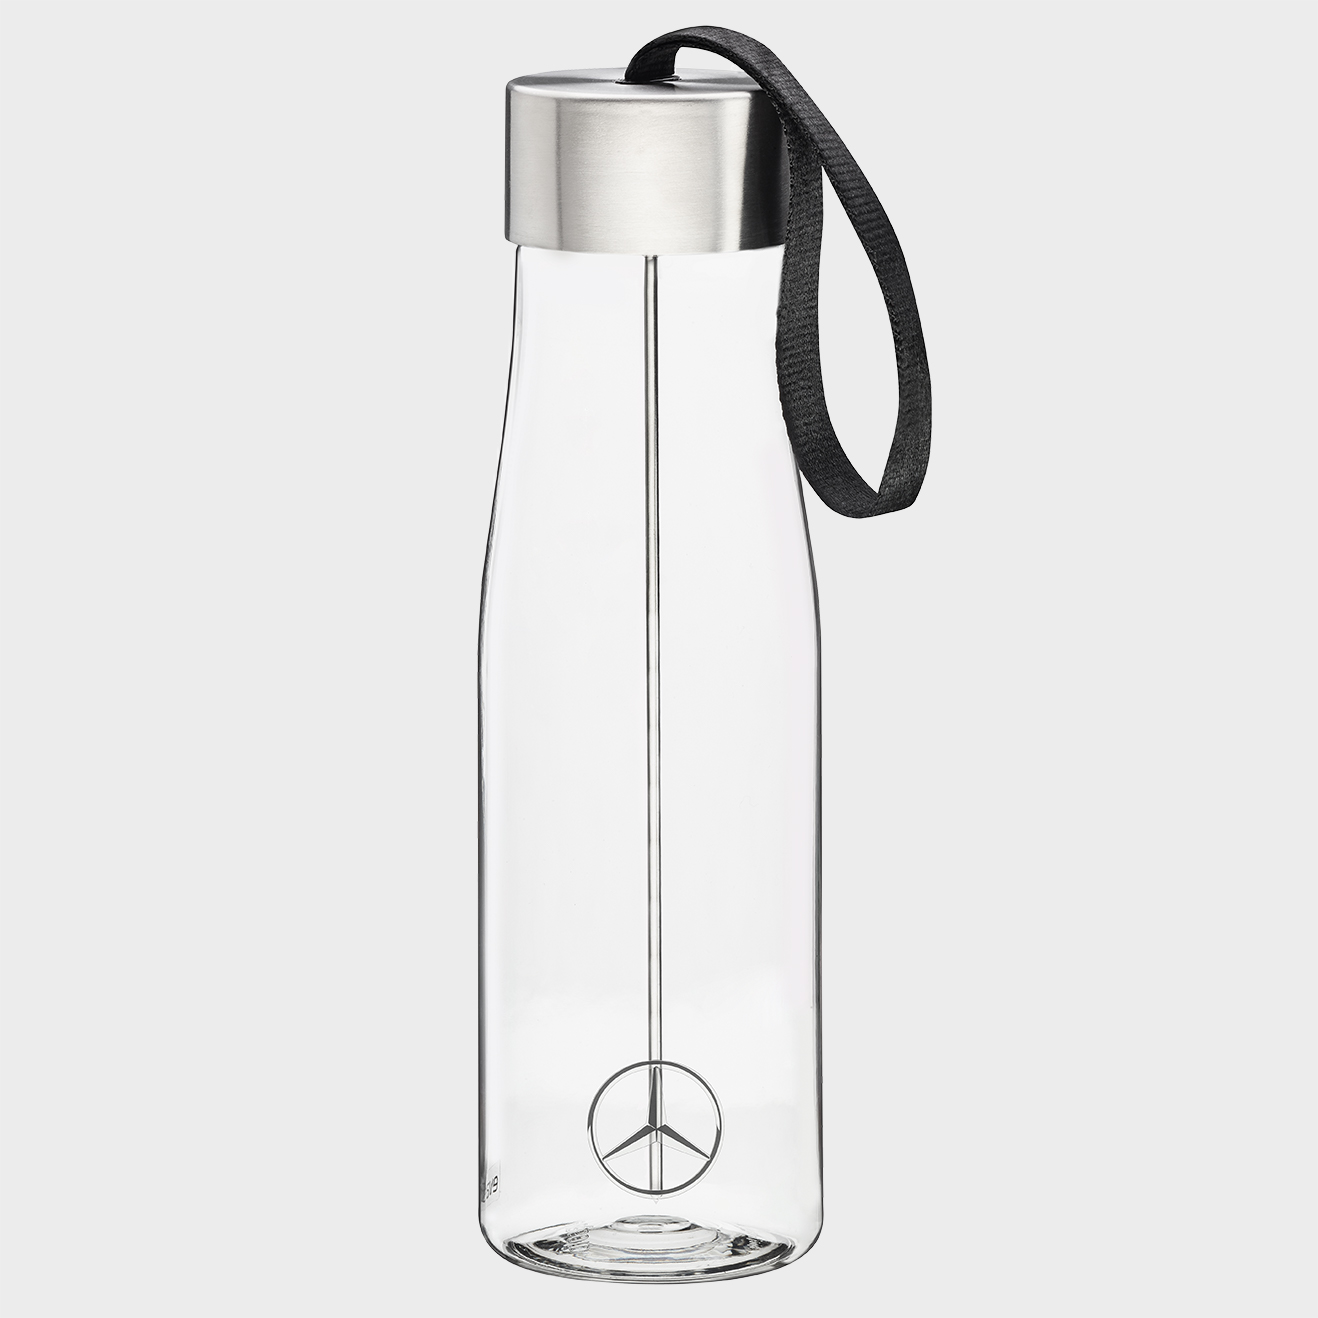 Mercedes-Benz Trinkflasche "Myflavour" by eva solo